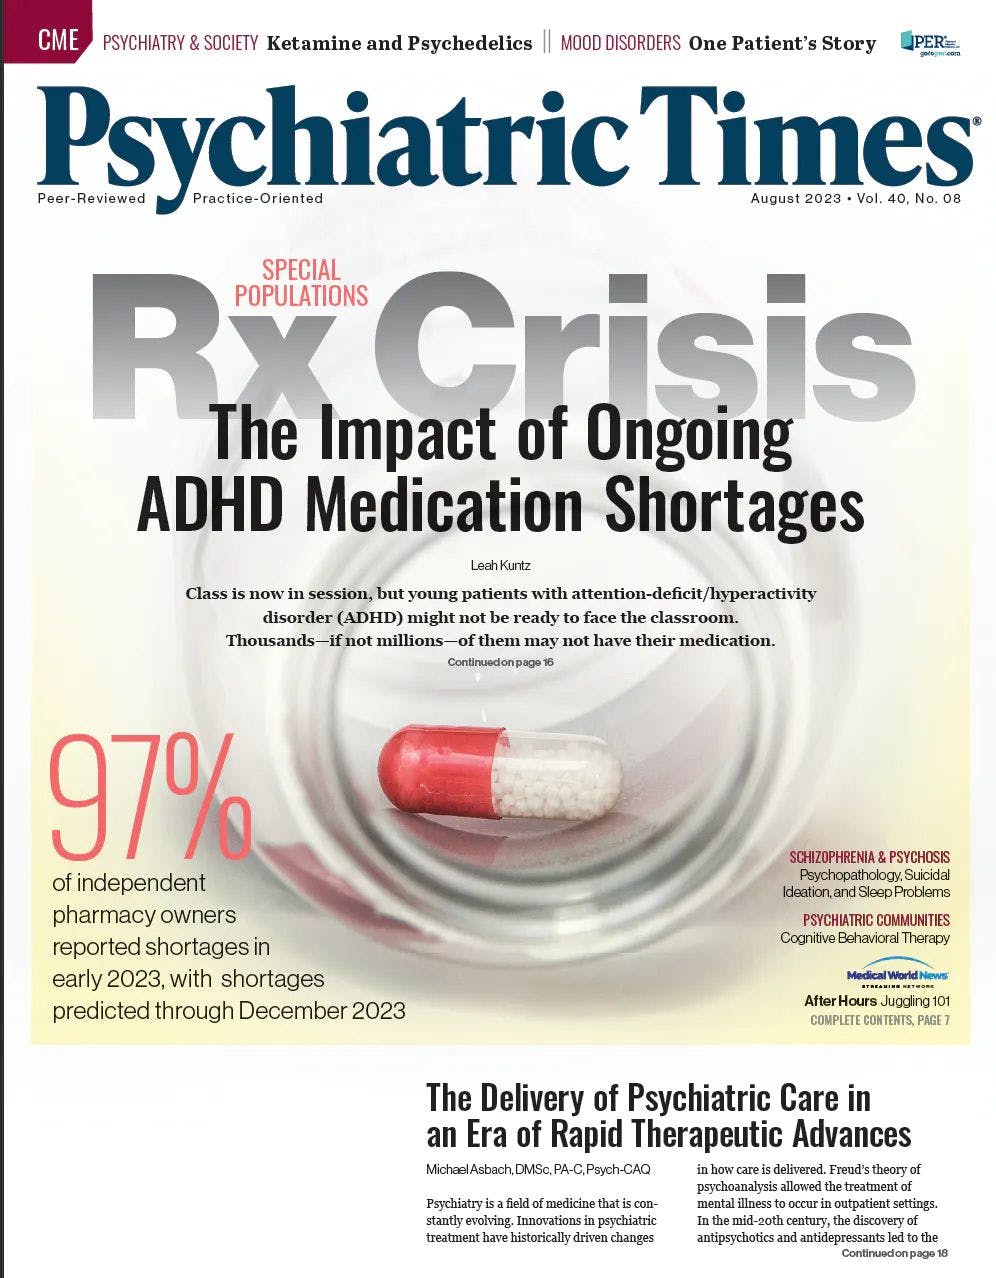 The experts weighed in on a wide variety of psychiatric issues for the August 2023 issue of Psychiatric Times.